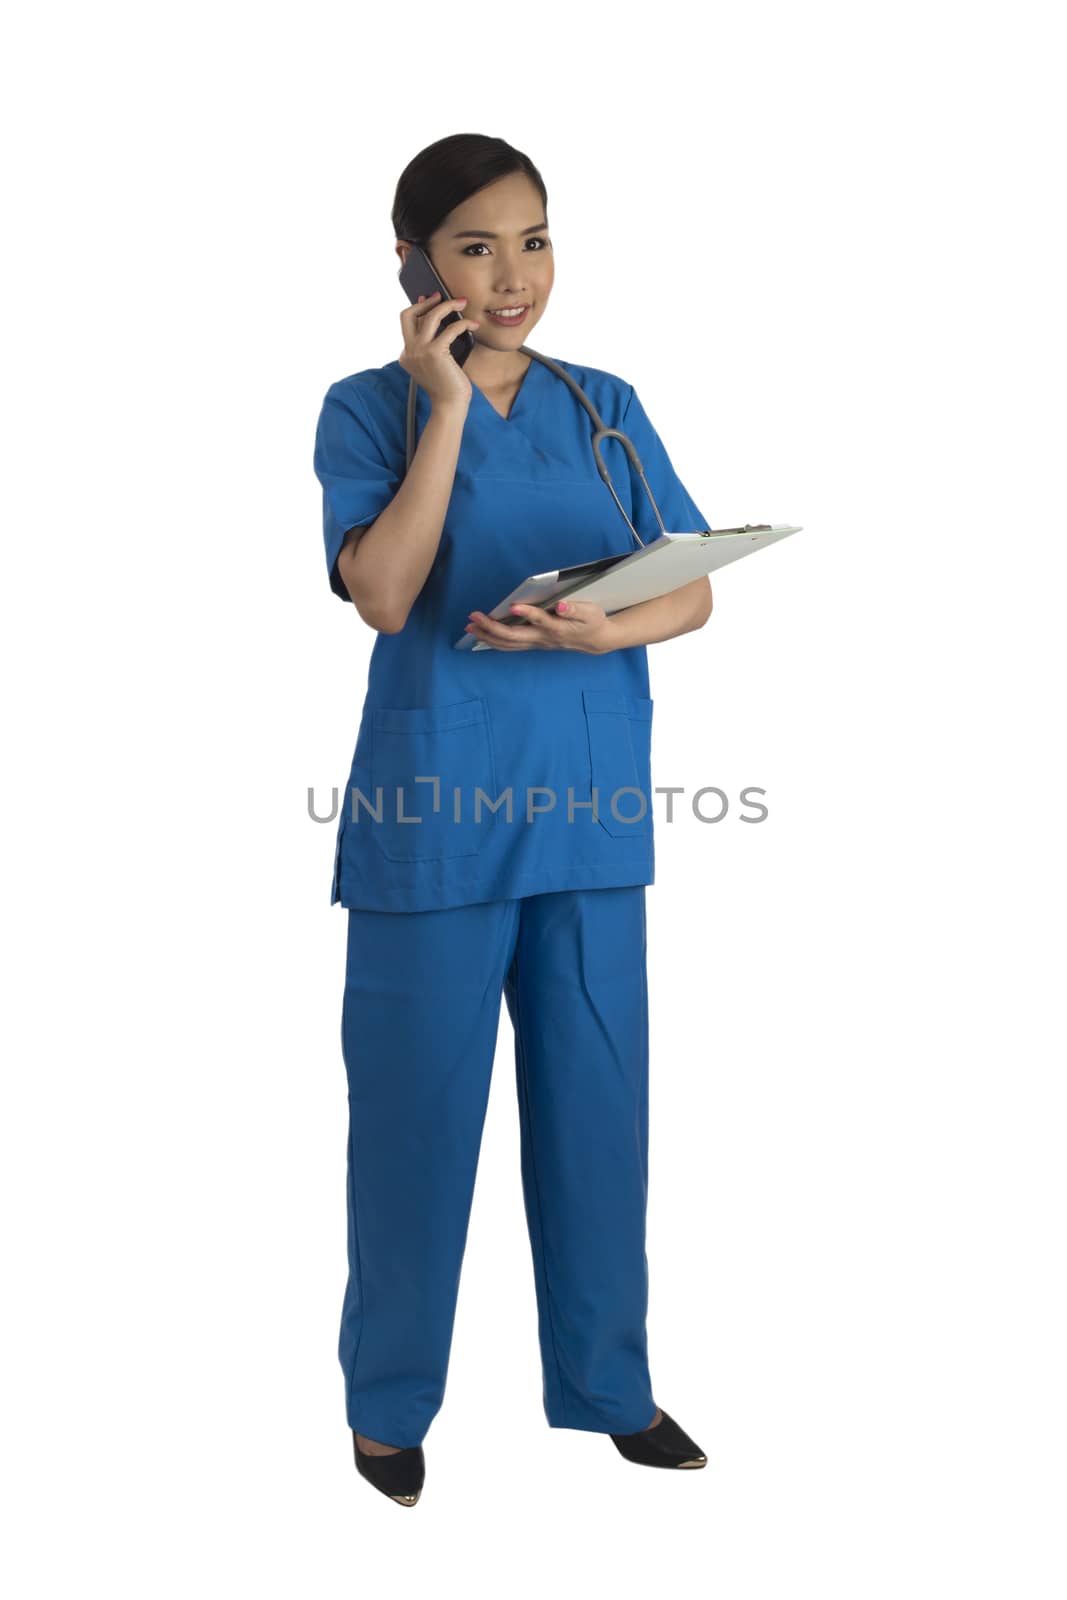 Busy female doctor in blue uniform standing on white background. by pandpstock_002